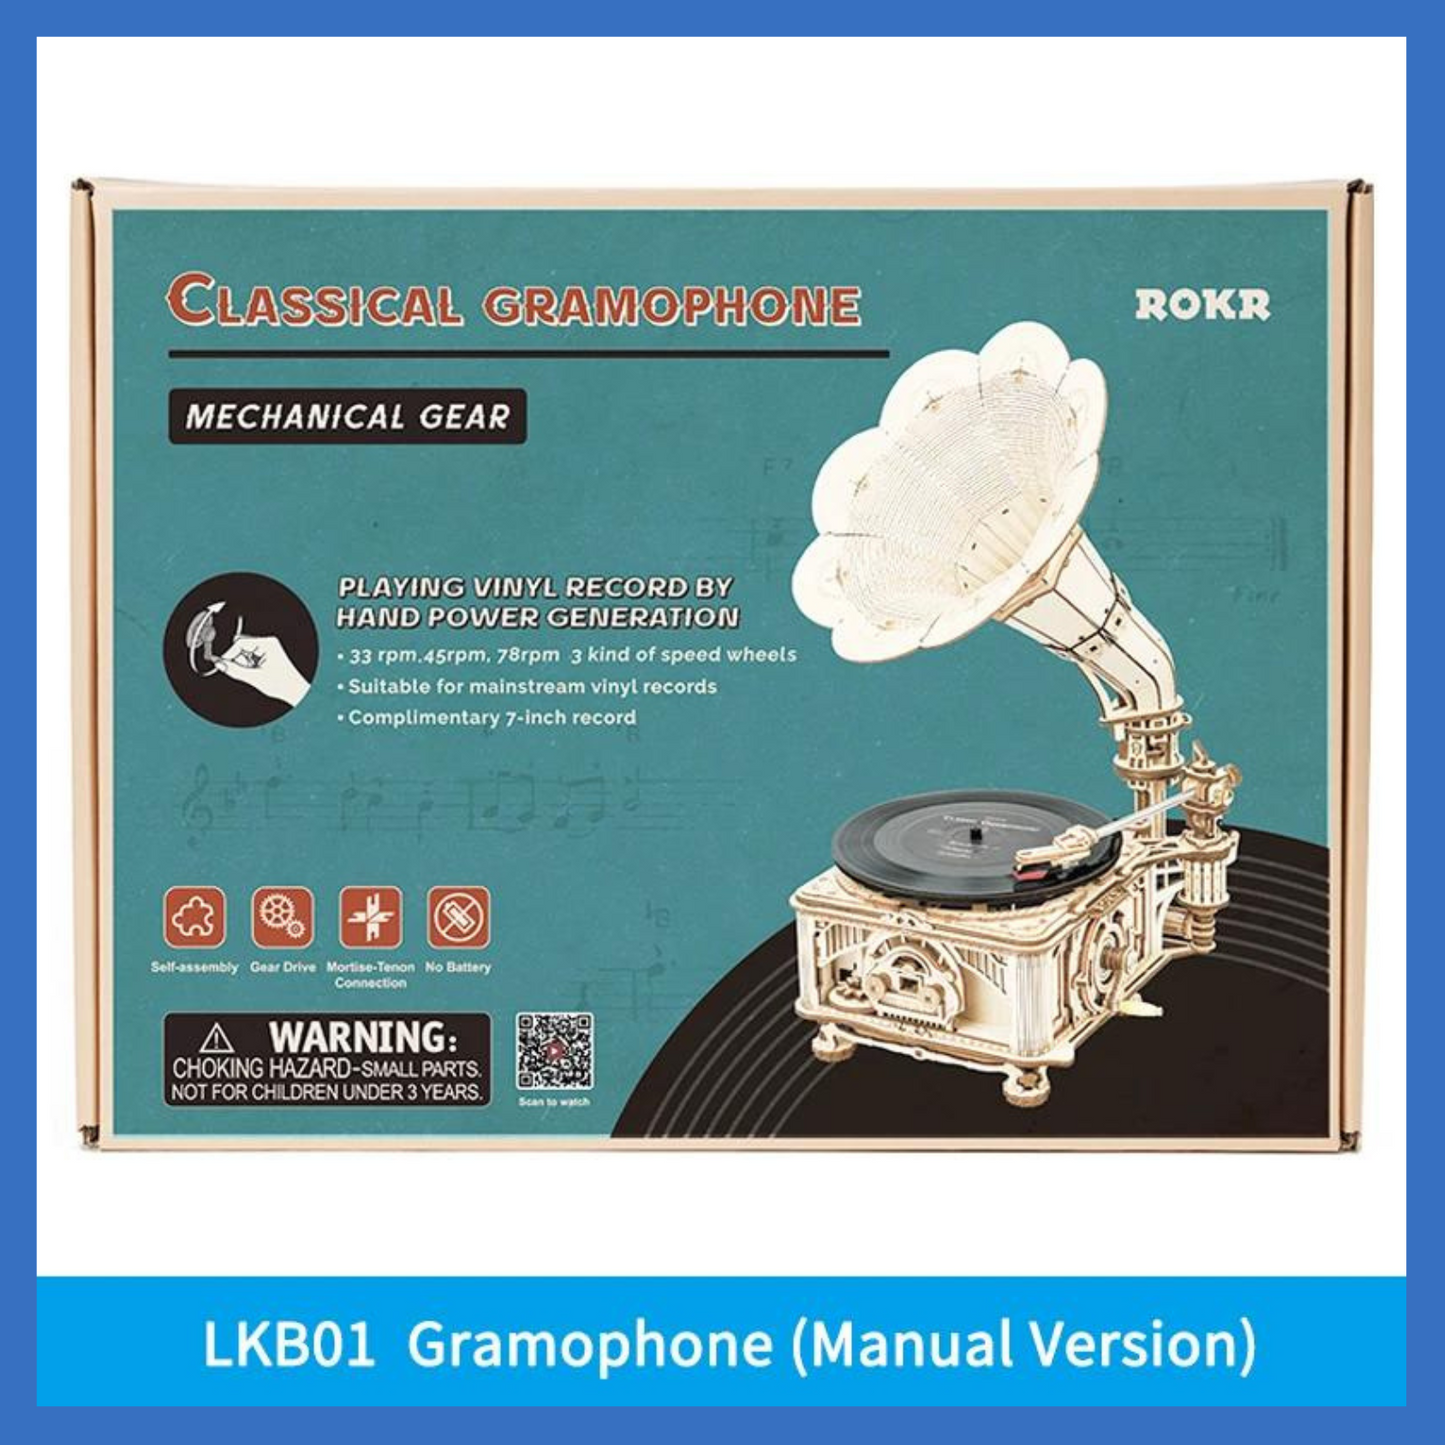 Classic Gramophone 3D Wooden Puzzle Model